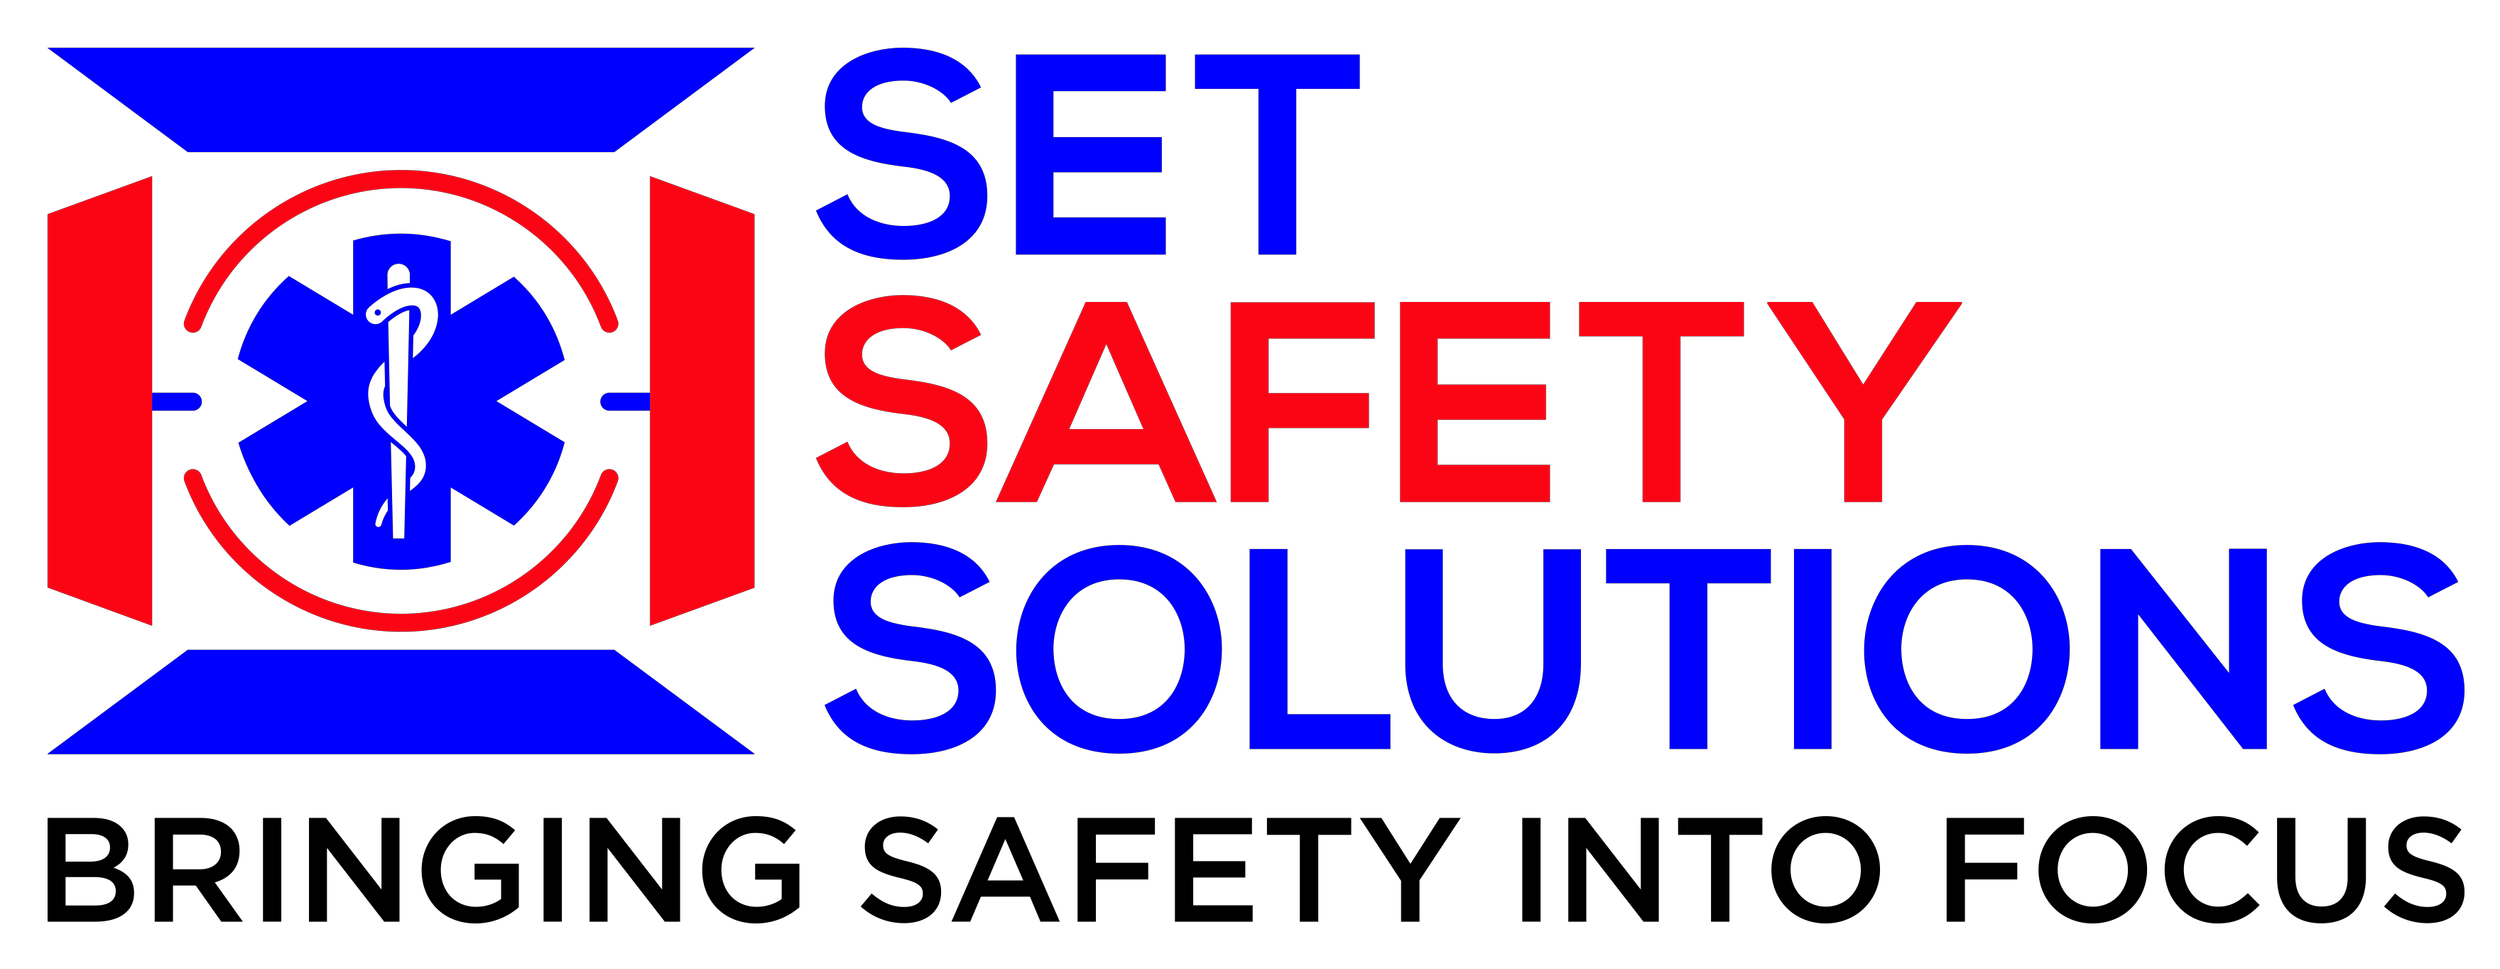 48355_Set Safety Solutions_Logo_RD_01 (1).png